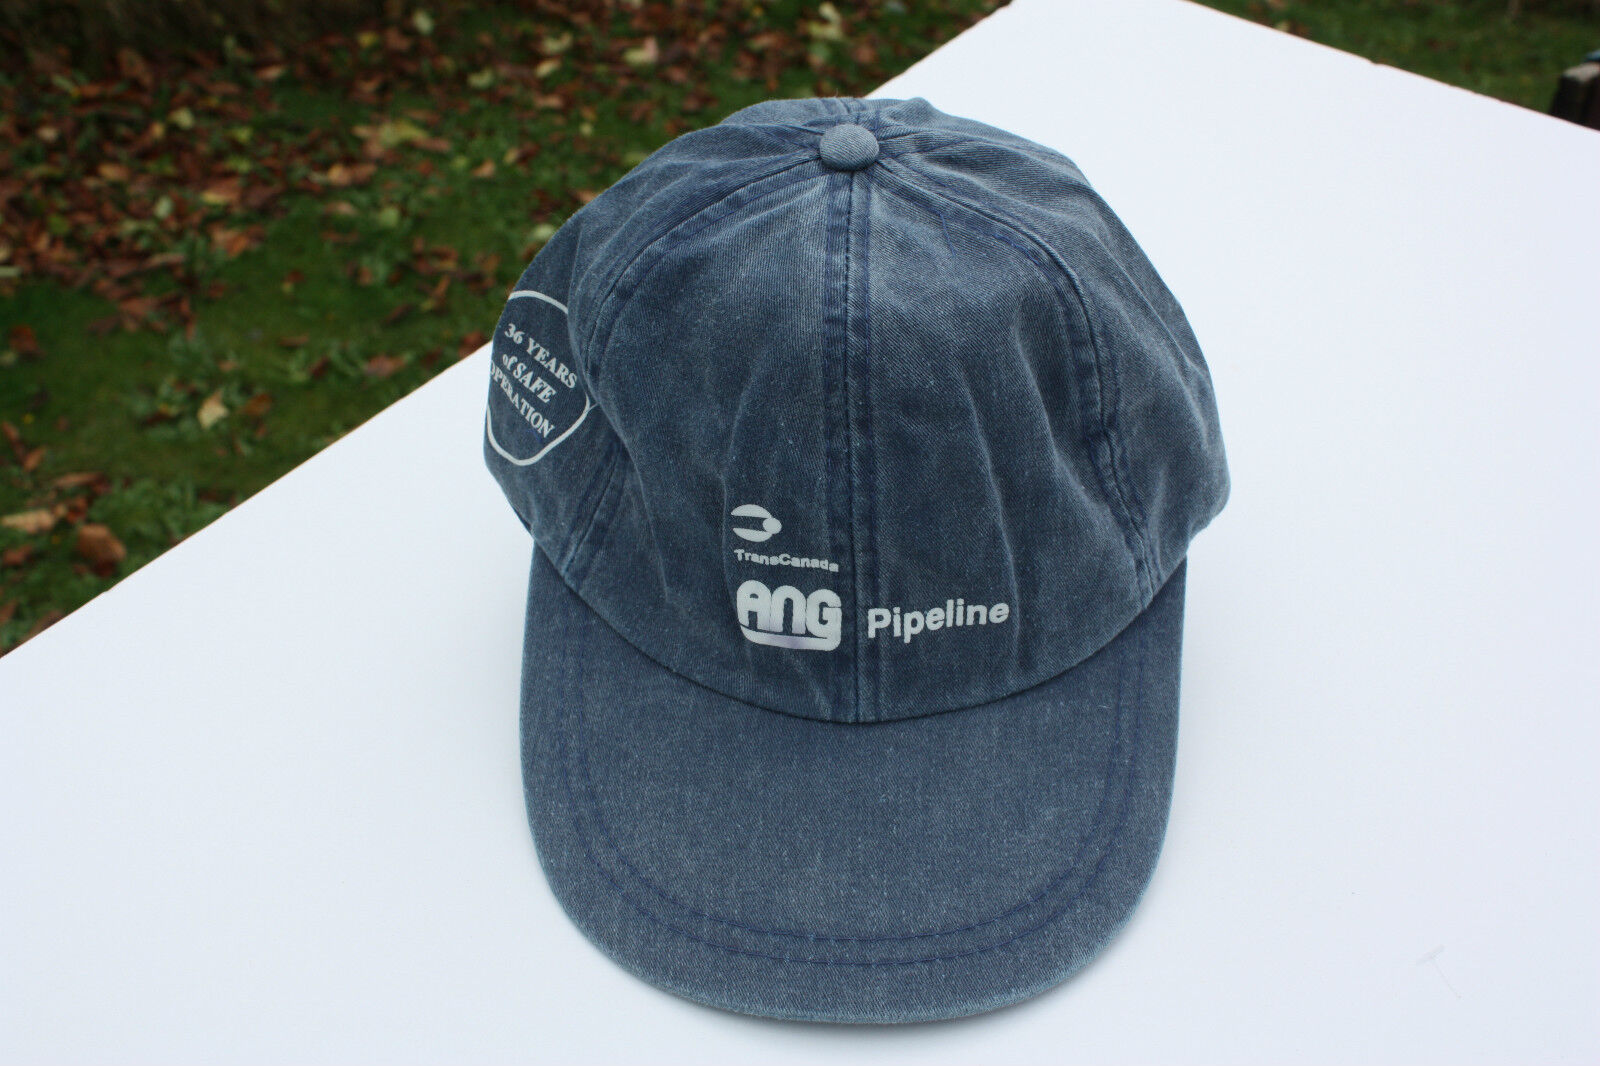 Ball Cap Hat - Trans Canada ANG Pipeline 36 yr Safe Operation - Oil Gas (H1248)